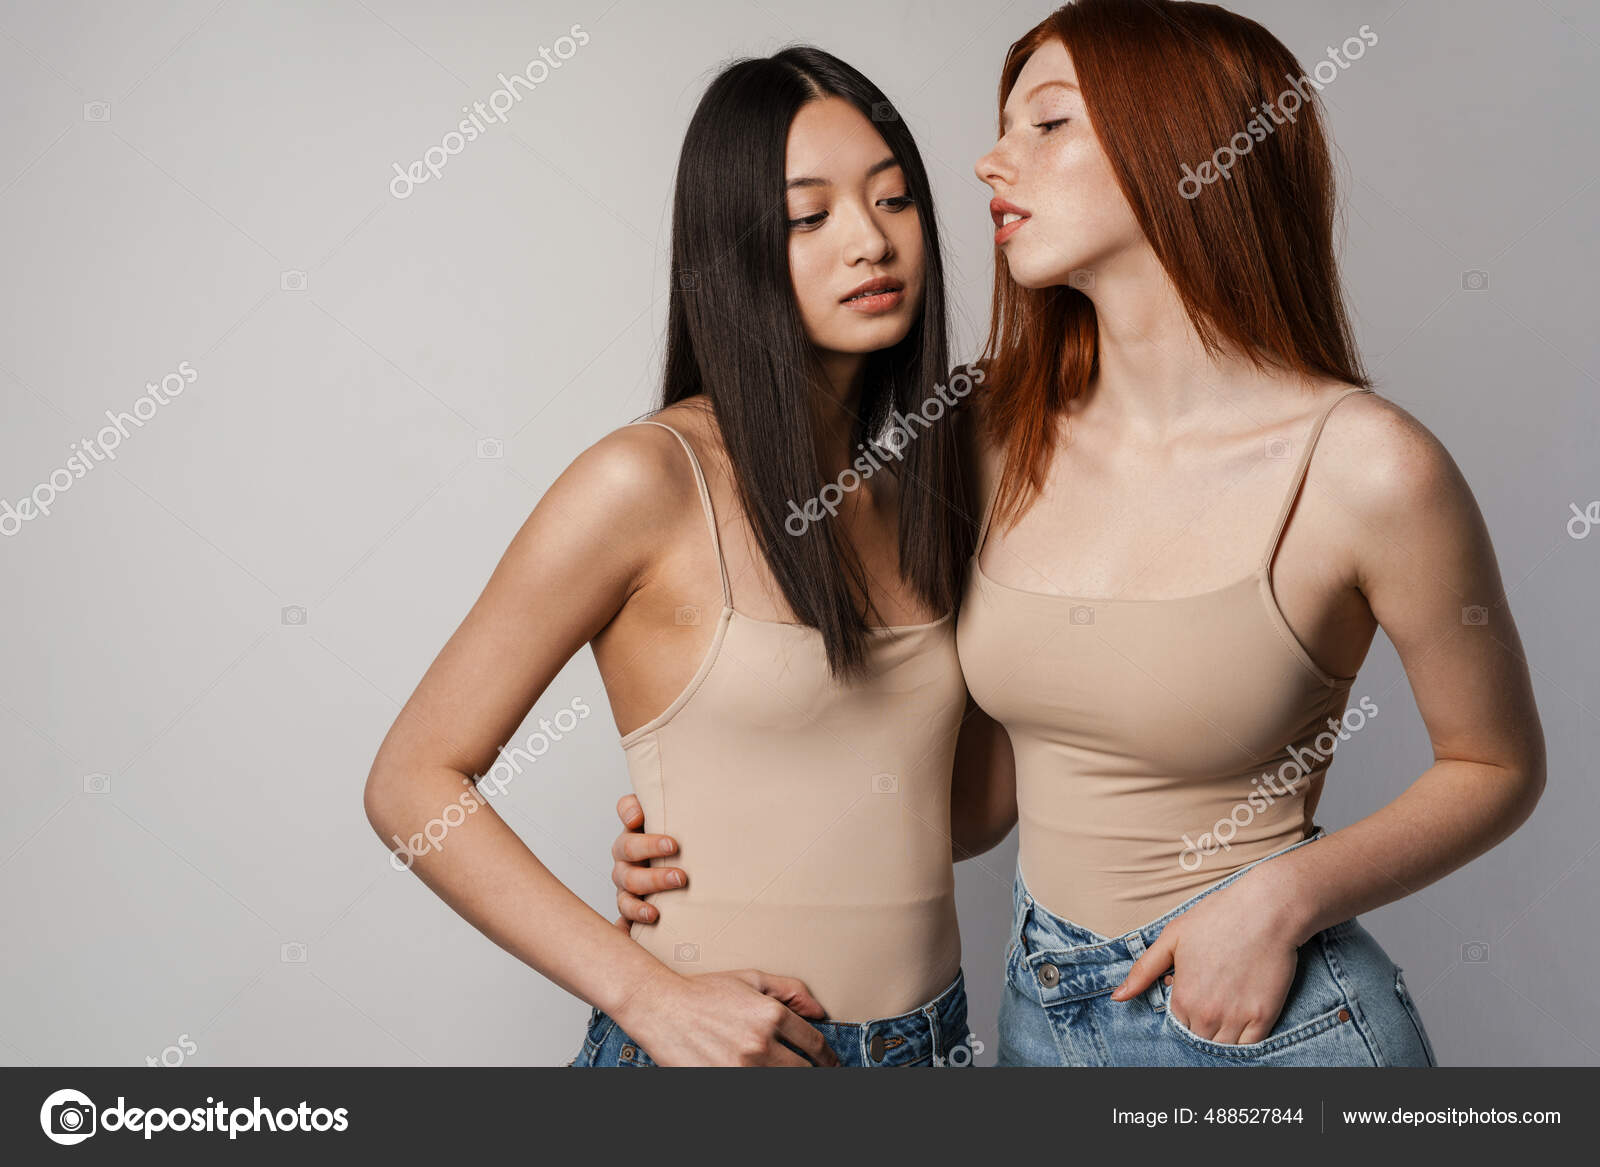 Two Women Wearing Black Clothes · Free Stock Photo